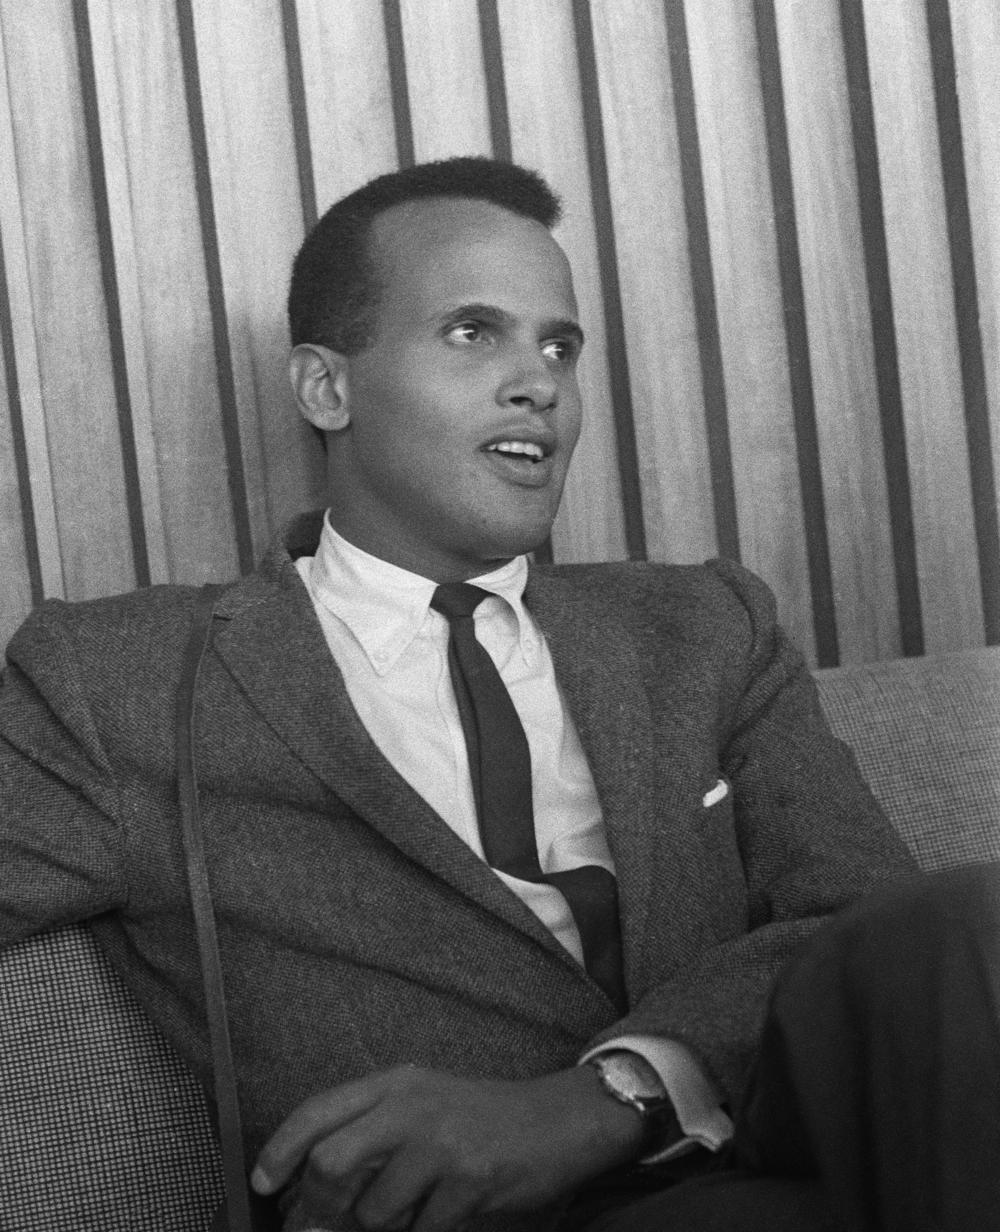 A young Belafonte in 1958.